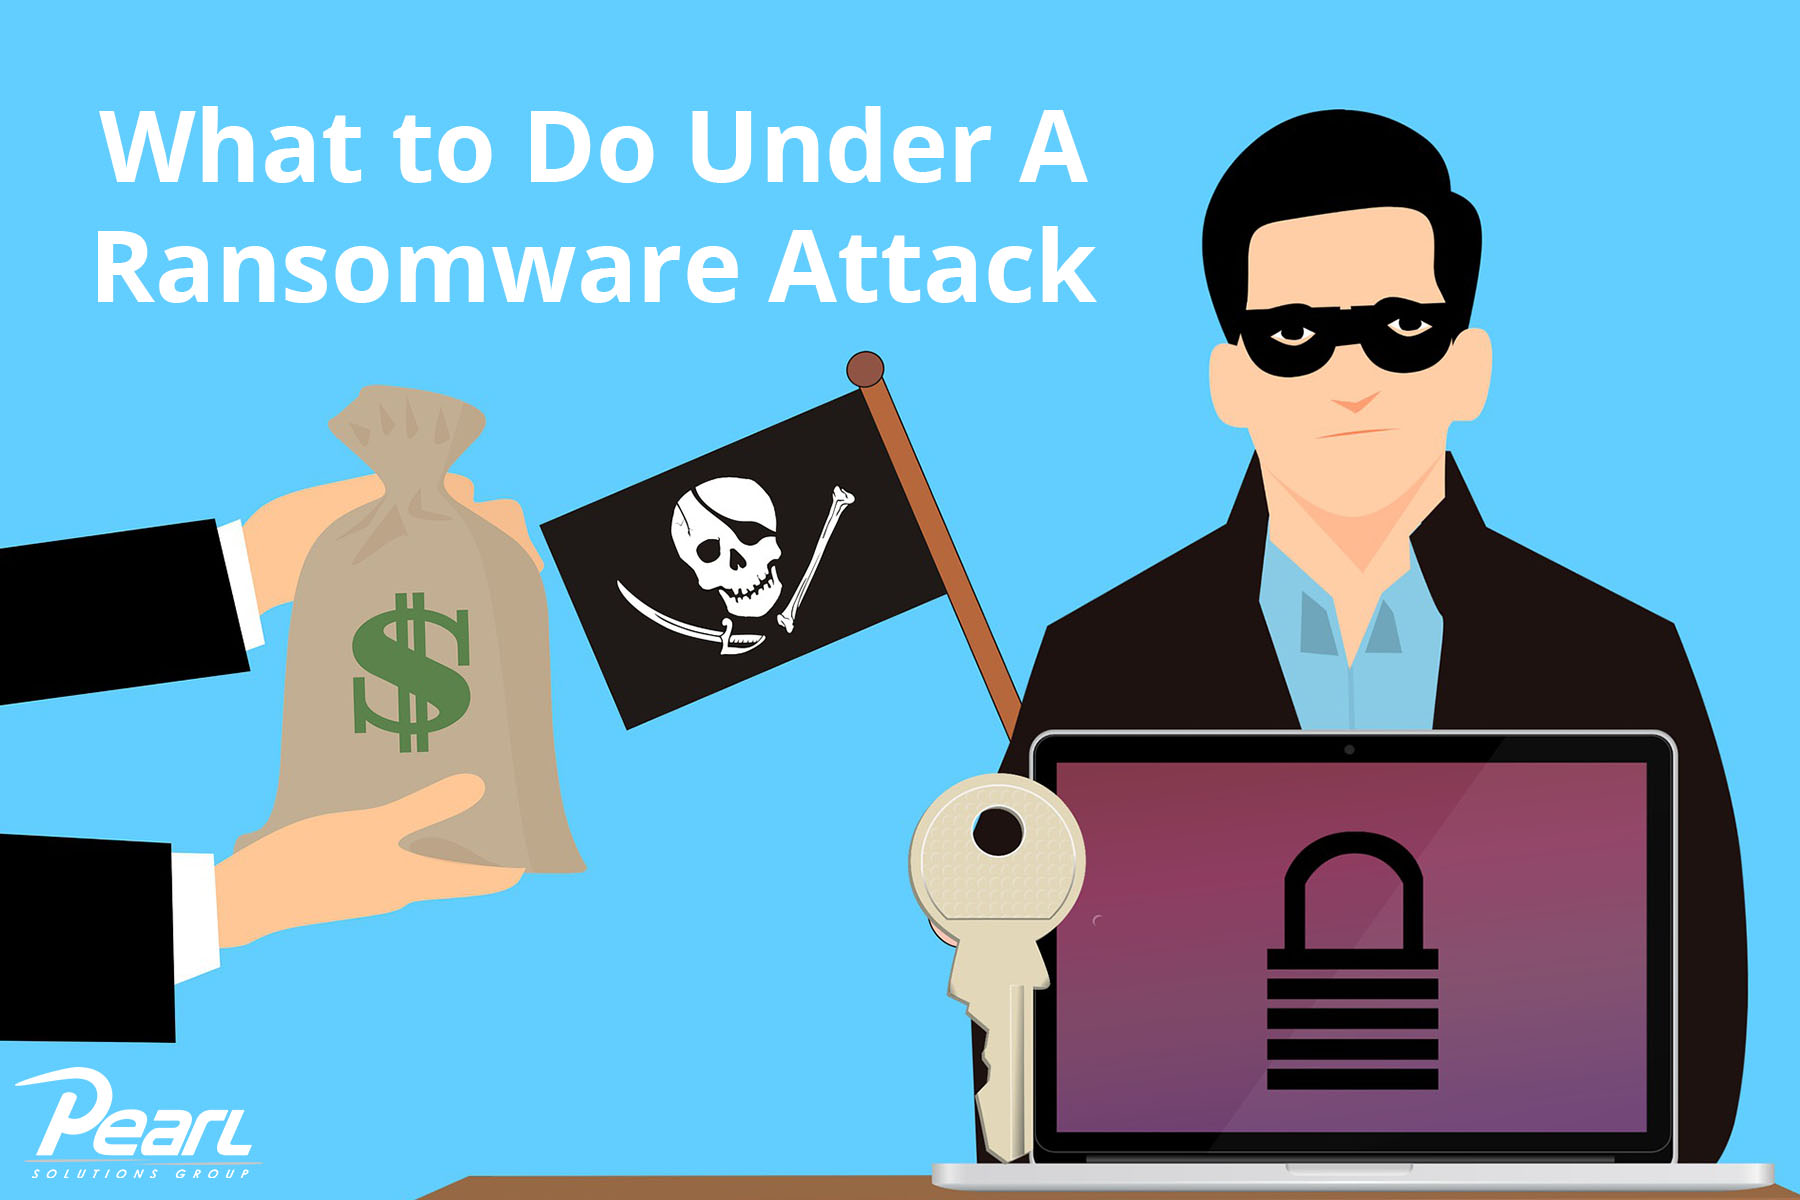 What to do Under a Ransomware Attack